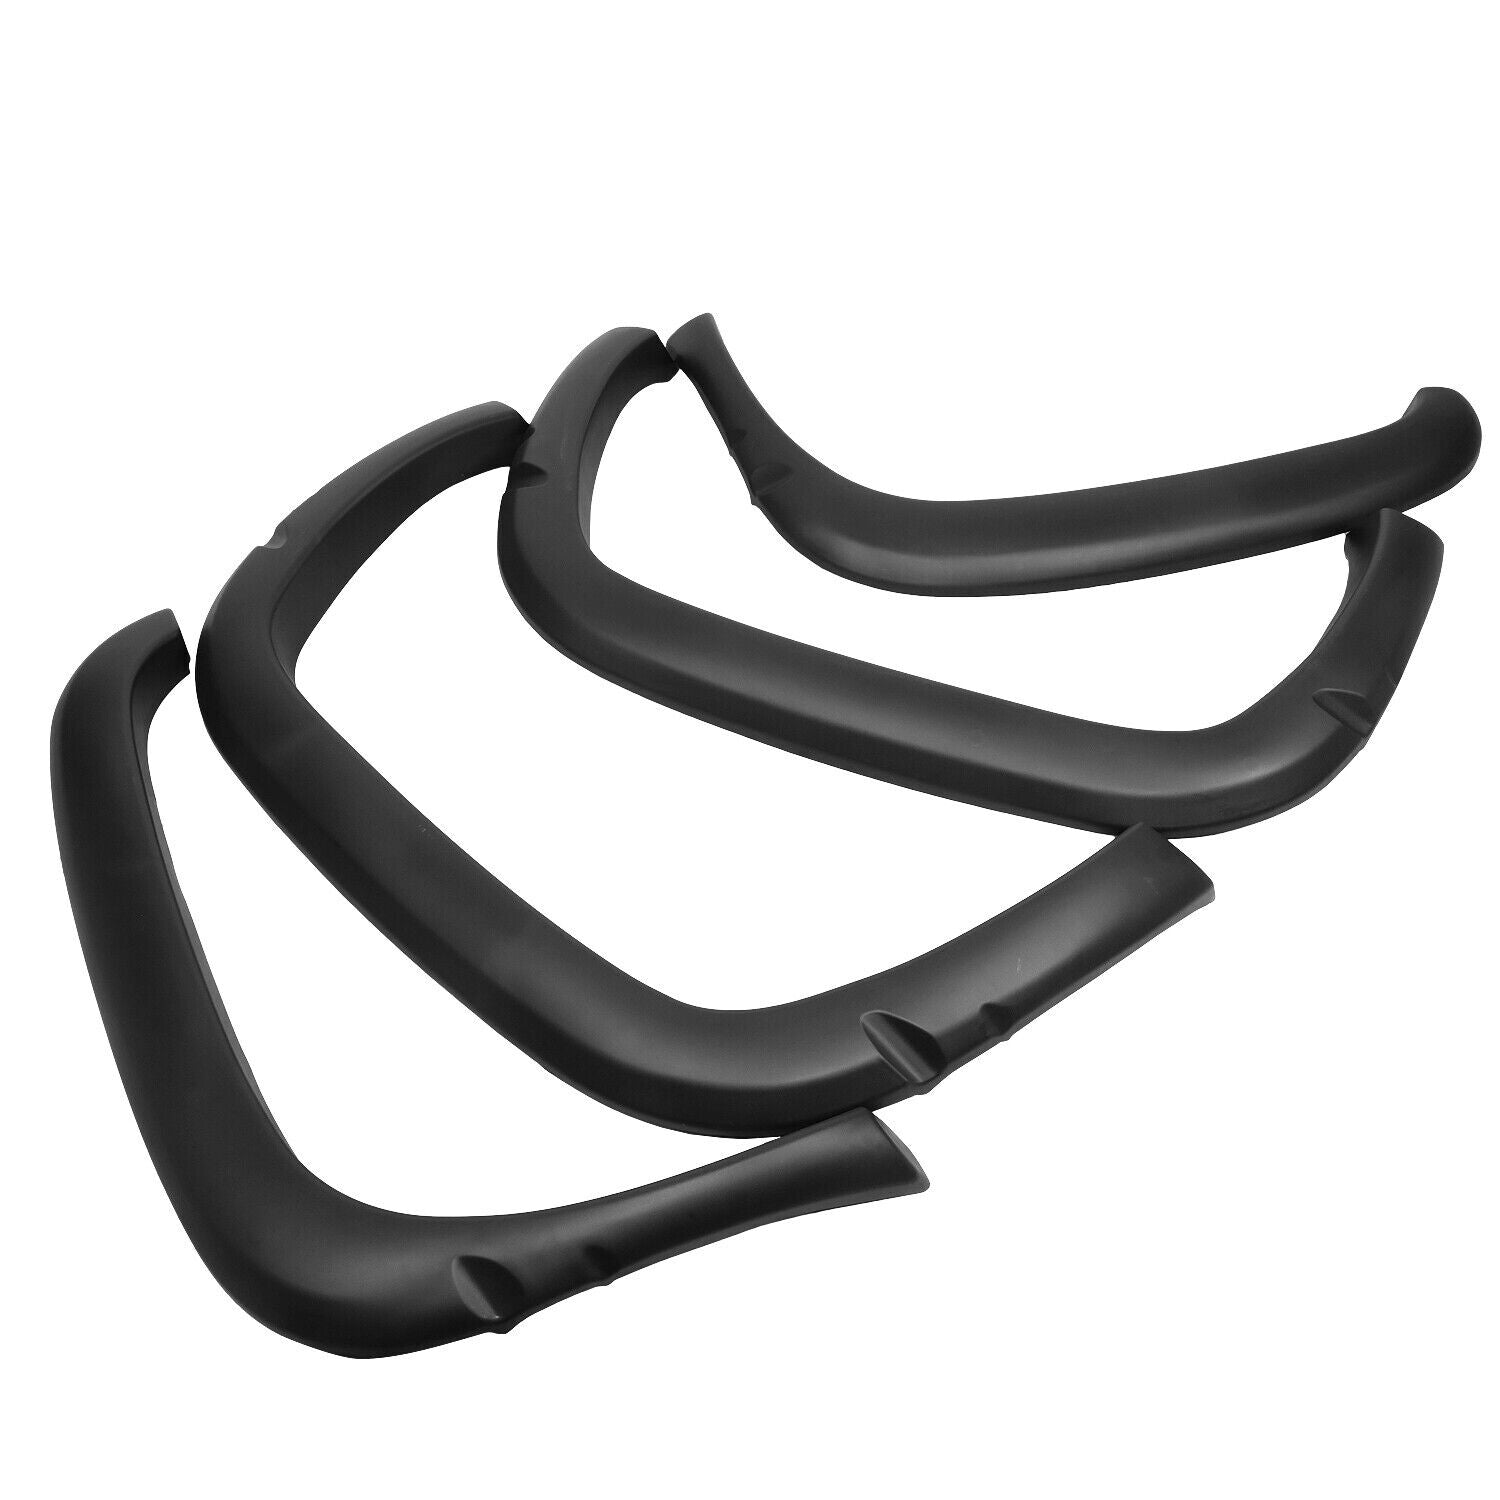 1994-2001 Dodge Ram Truck Fender Flares to Match-Smooth Style Painted to Match